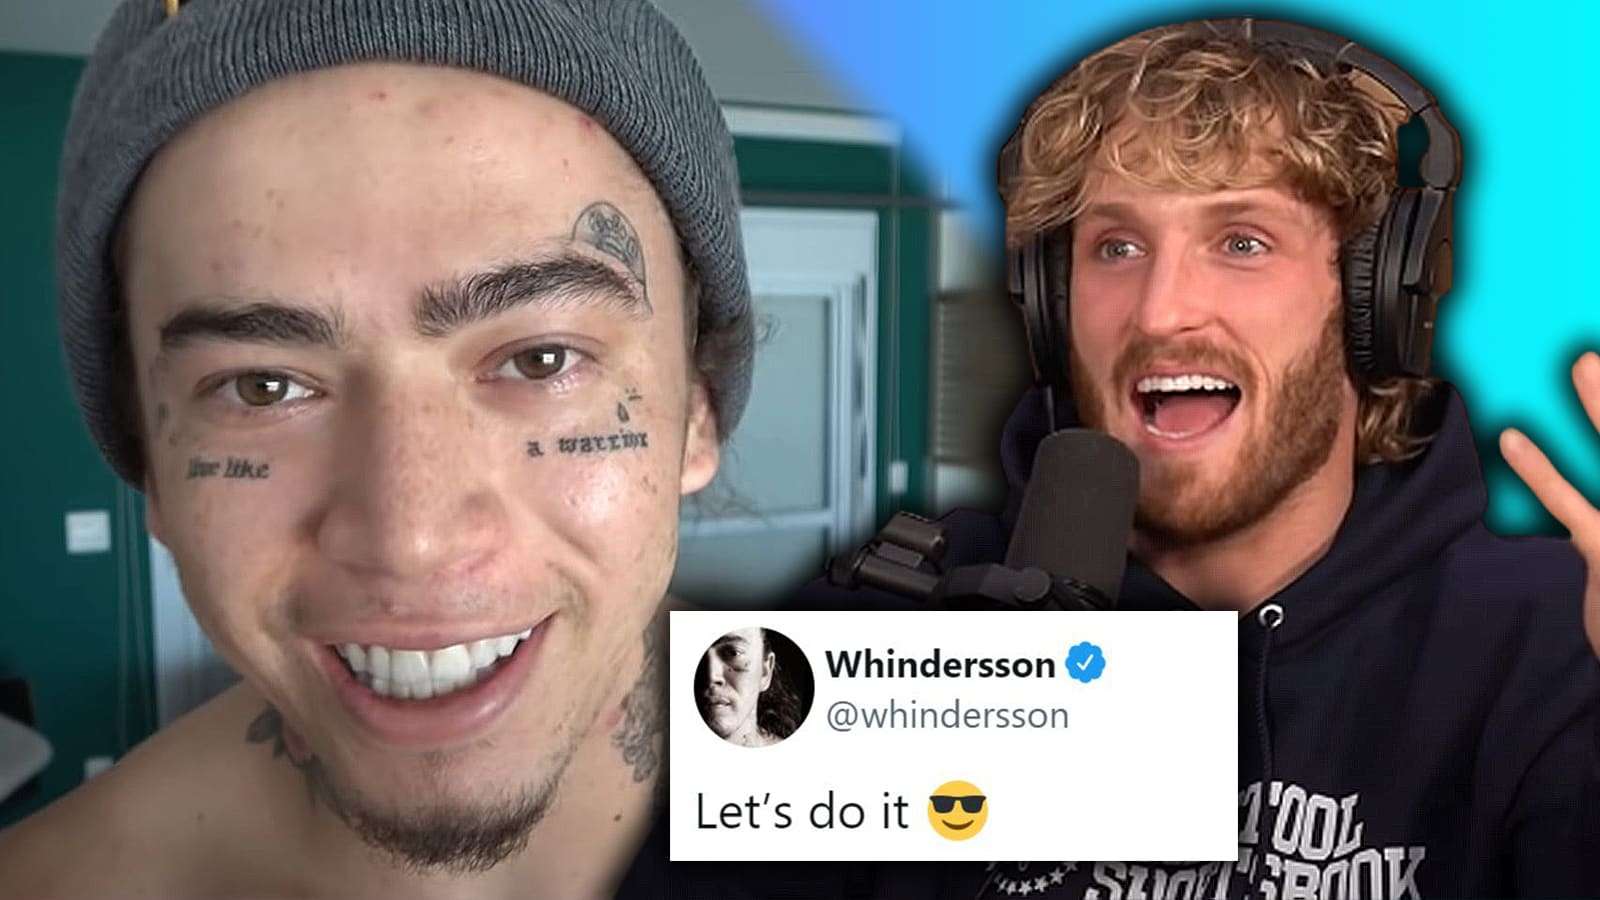 Logan Paul accepts boxing match against Whindersson